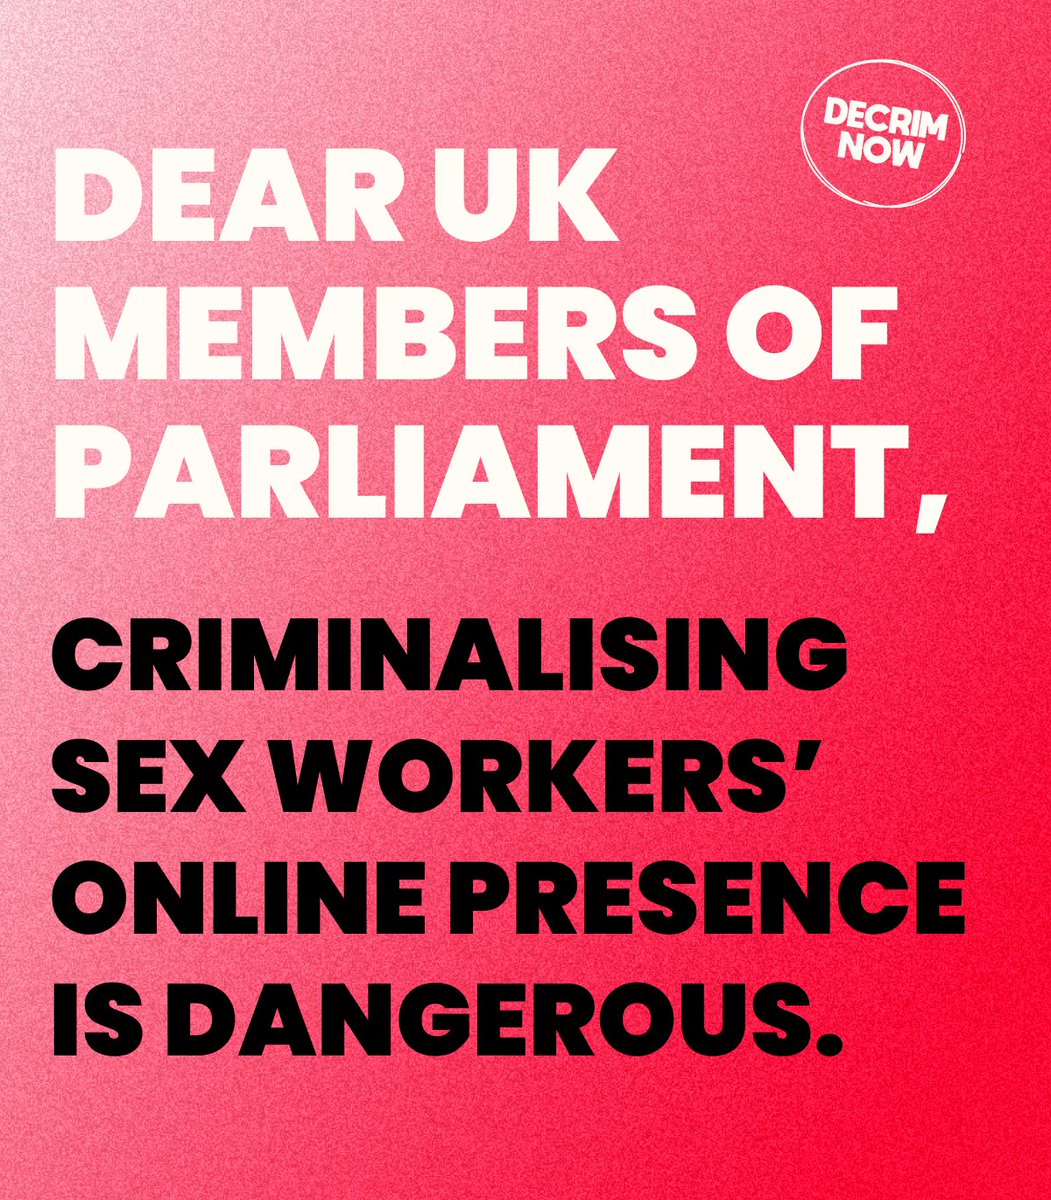  @UKAPHQ signed our open letter against the Nordic Model Members trade association specialising in adult content production.Read the letter here  https://decrimnow.org.uk/open-letter-on-the-nordic-model/  #notonordicmodel